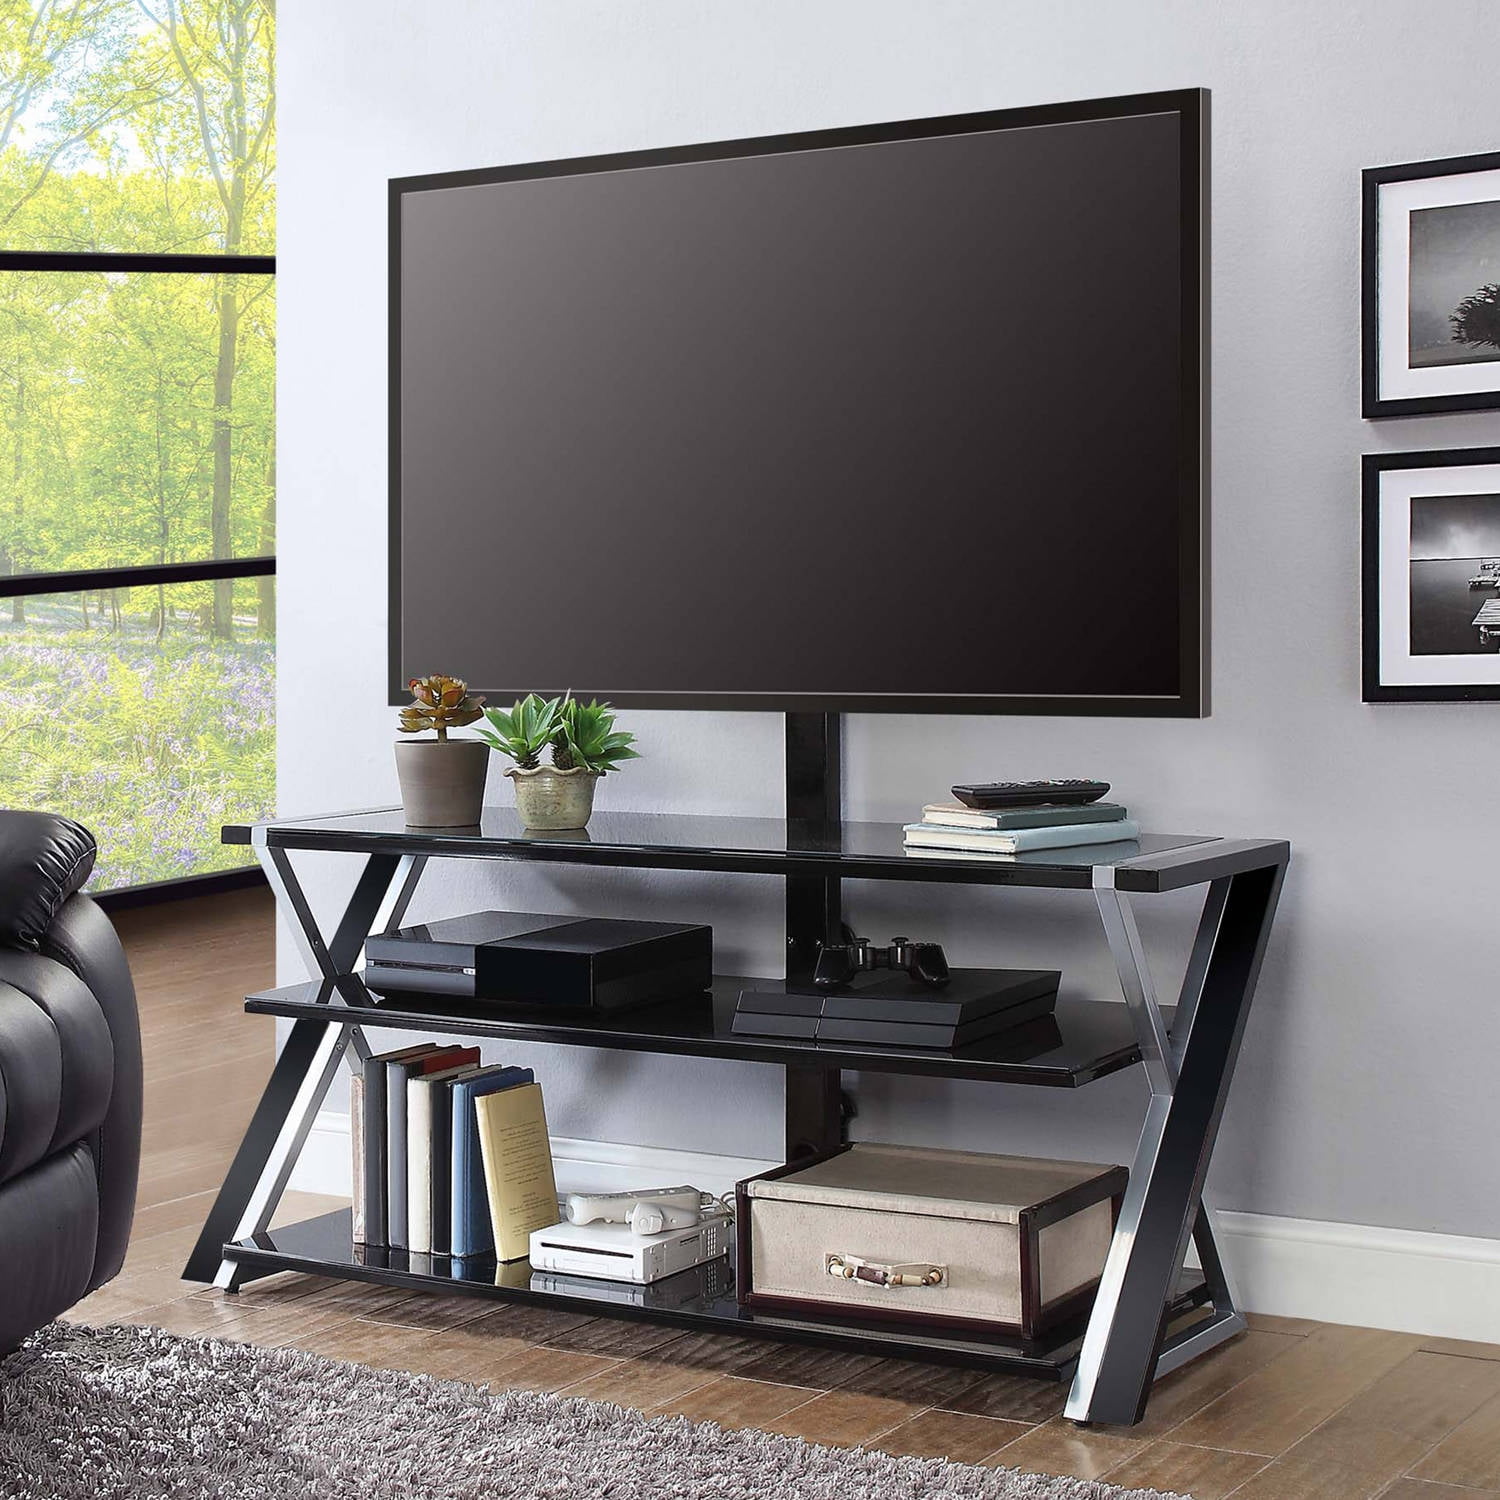 3 in 1 tv stand with mount